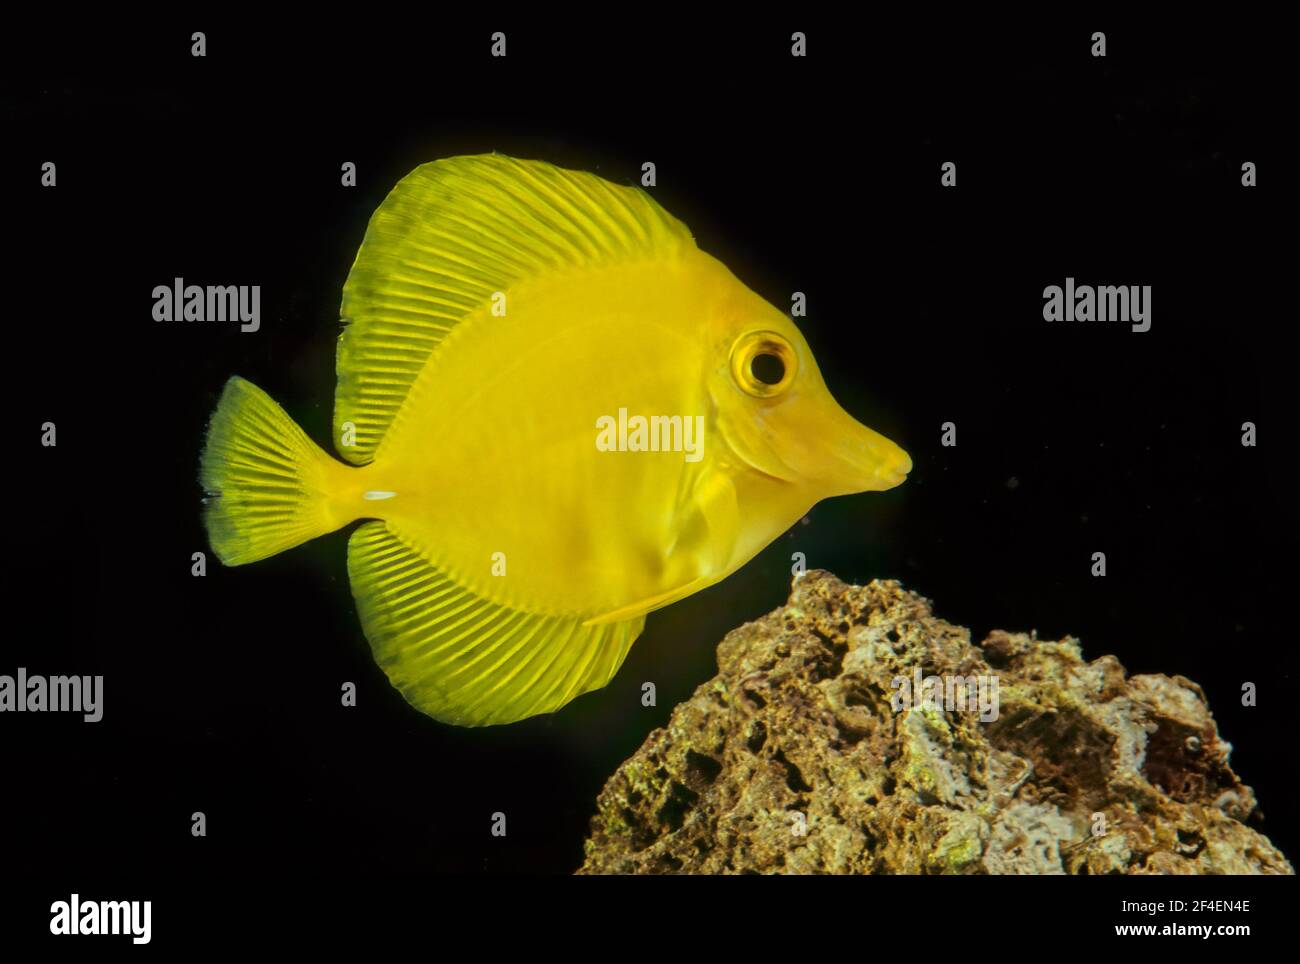 The yellow tang (Zebrasoma flavescens) is a saltwater fish species of the family Acanthuridae. It is one of the most popular marine aquarium fish. Stock Photo